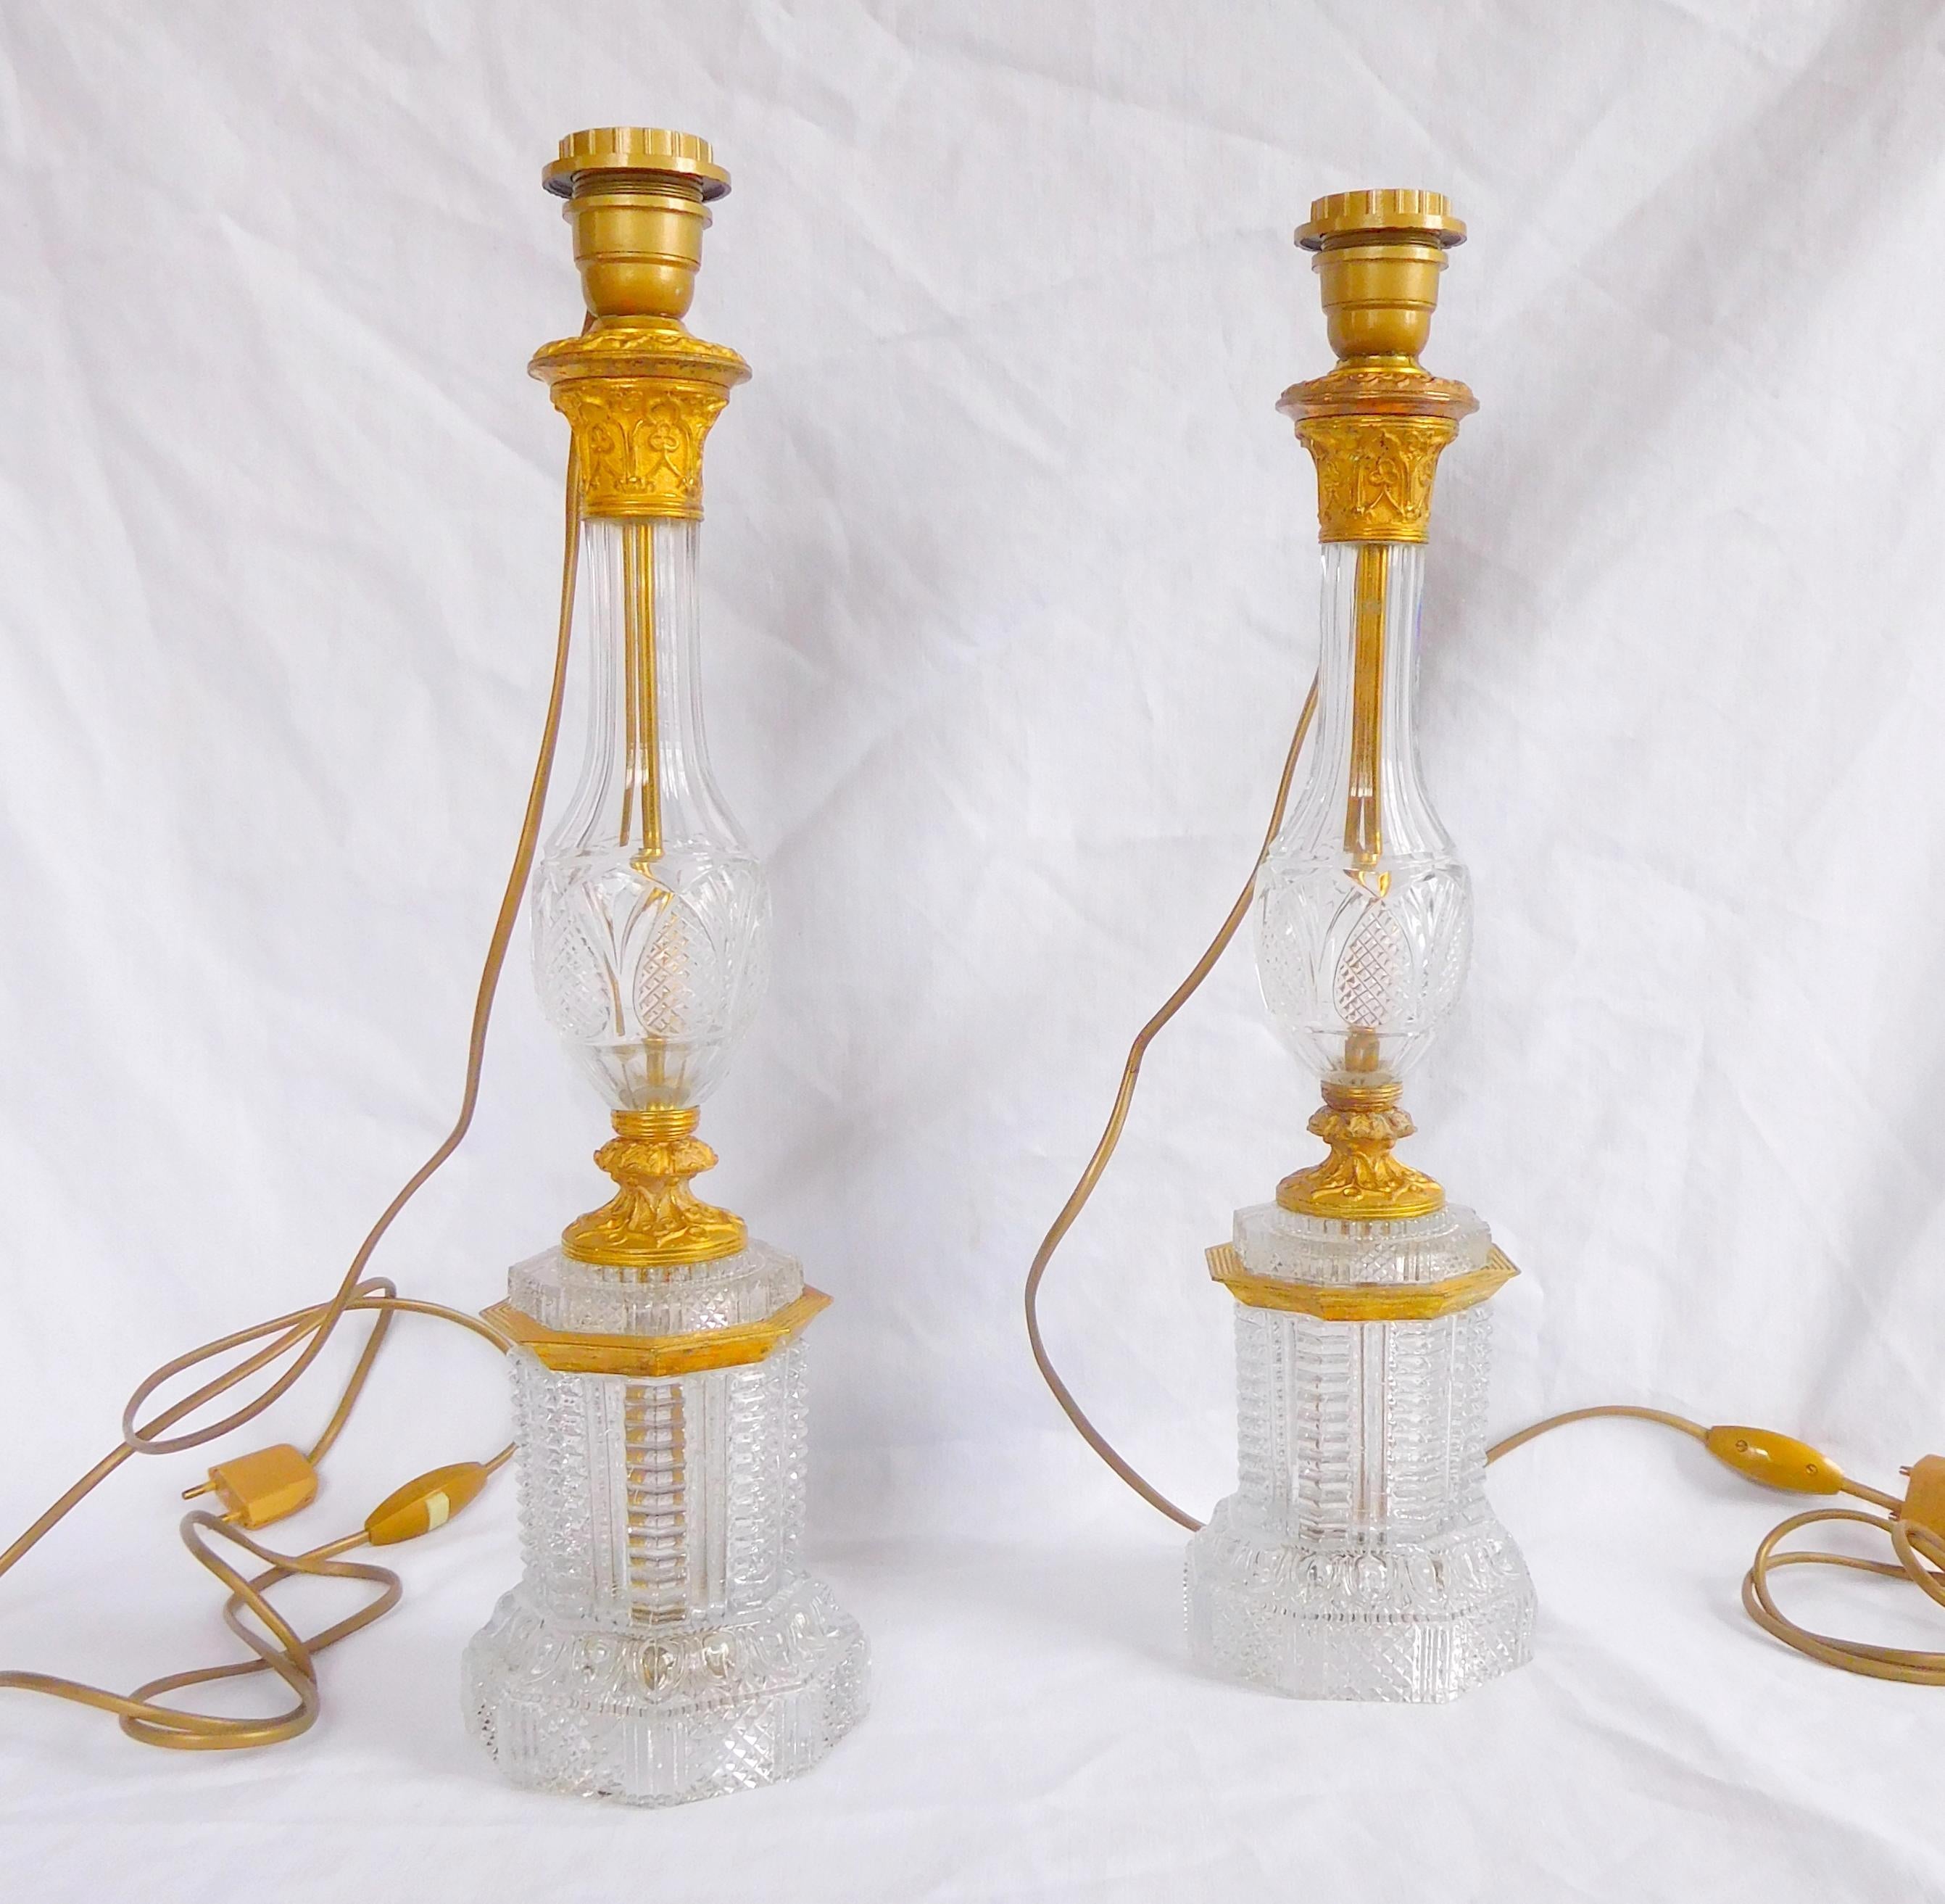 Restauration Antique French pair of tall crystal & ormolu lampstands - early 19th century